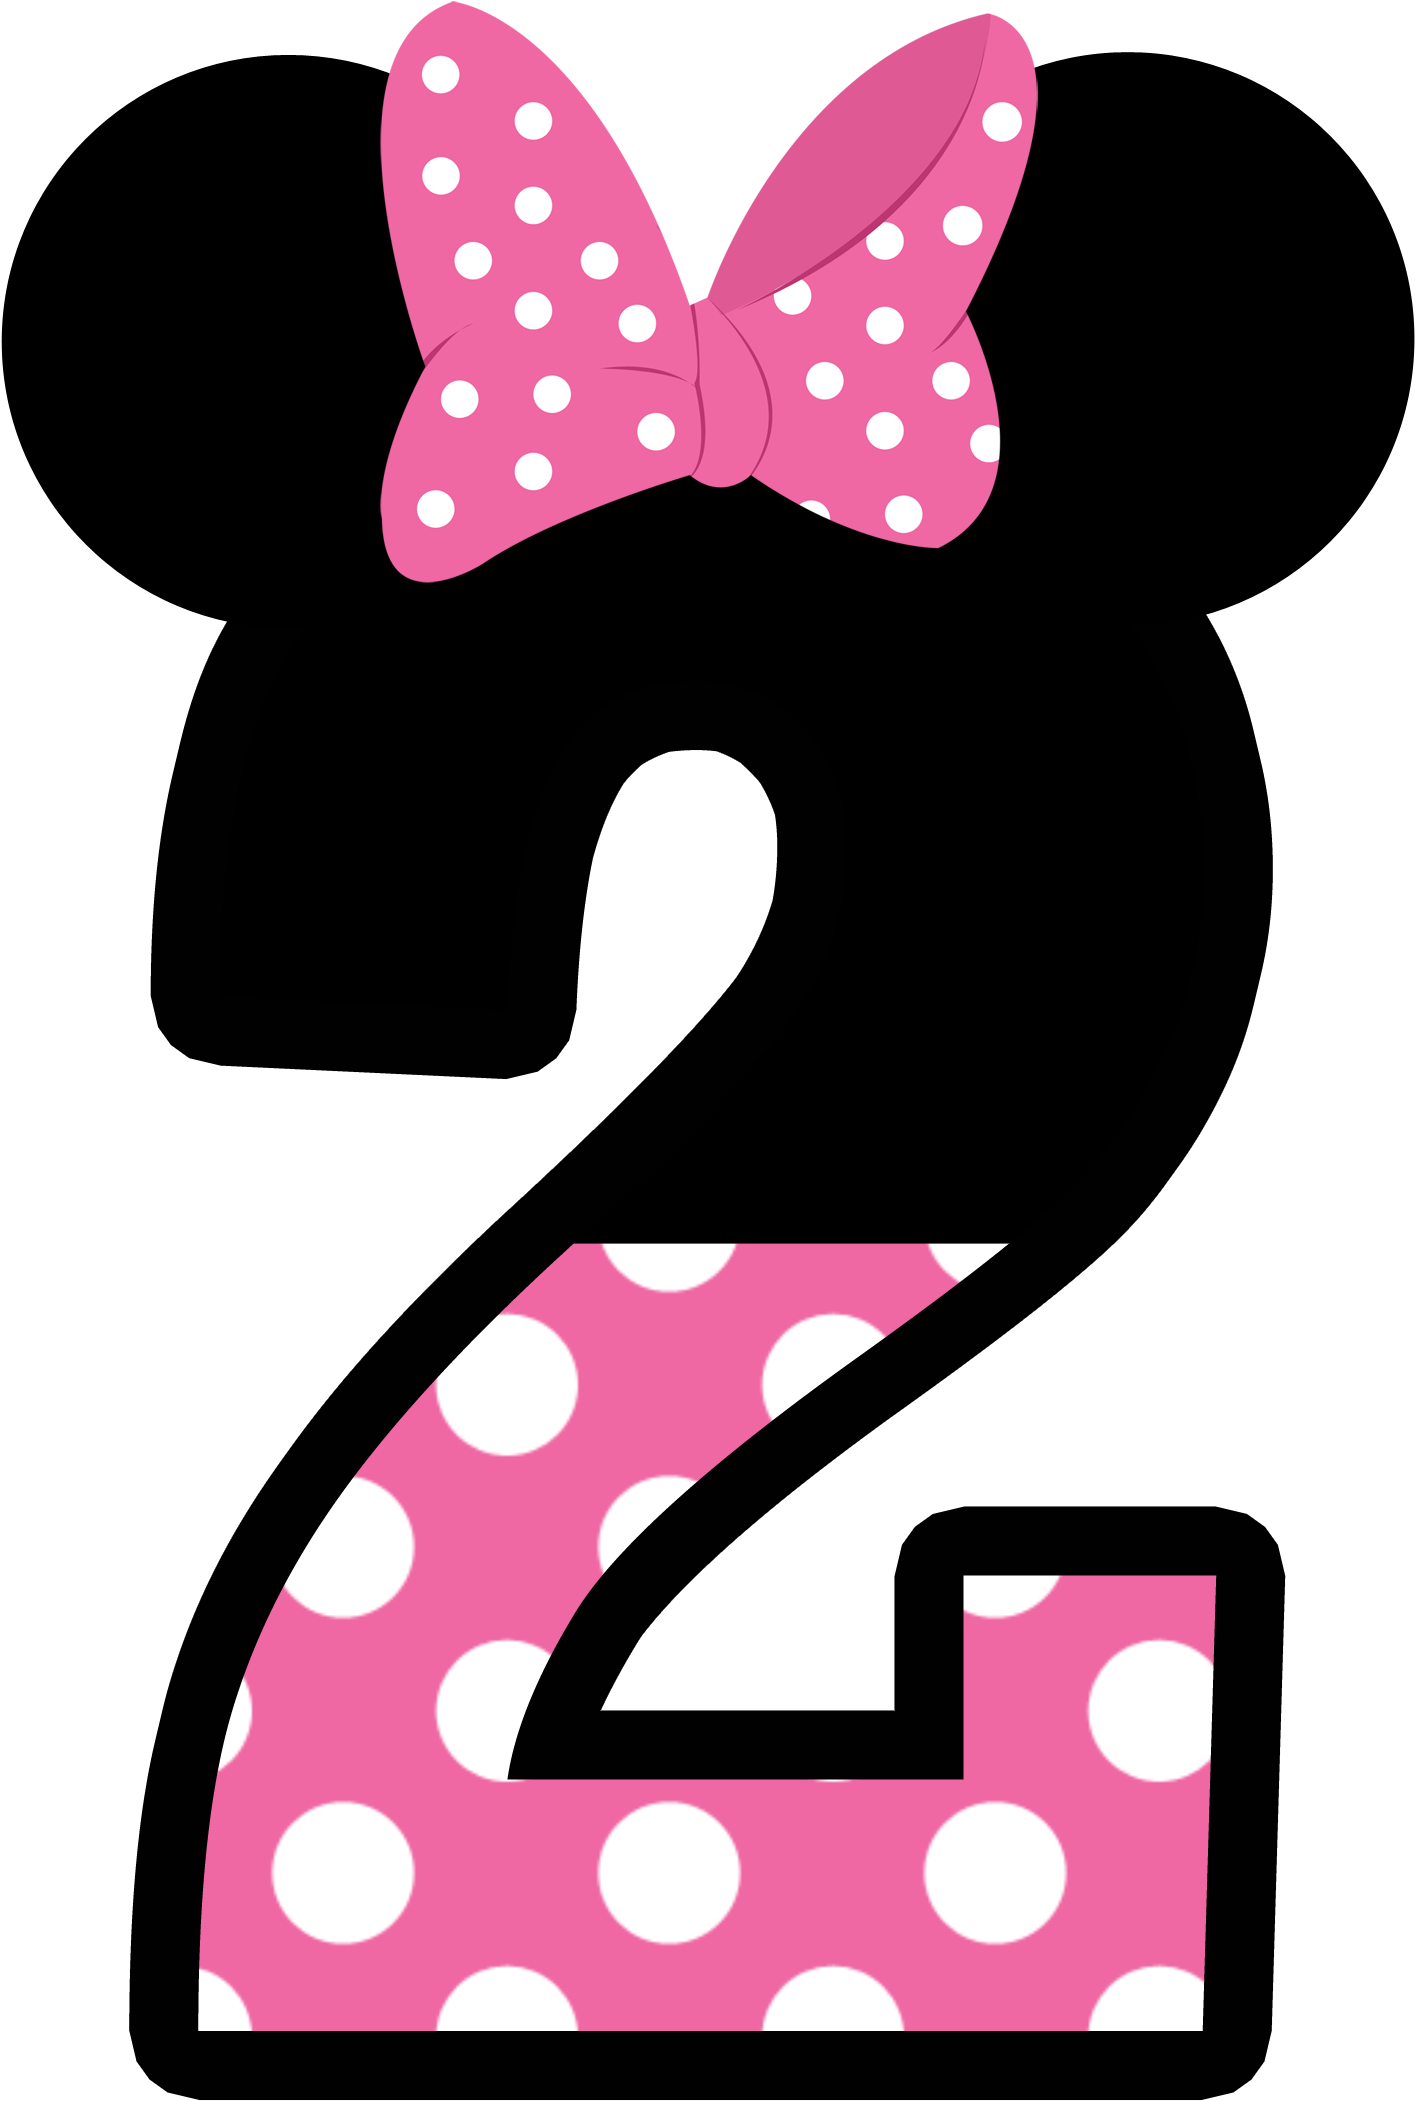 A Pink And White Polka Dot Number With A Bow